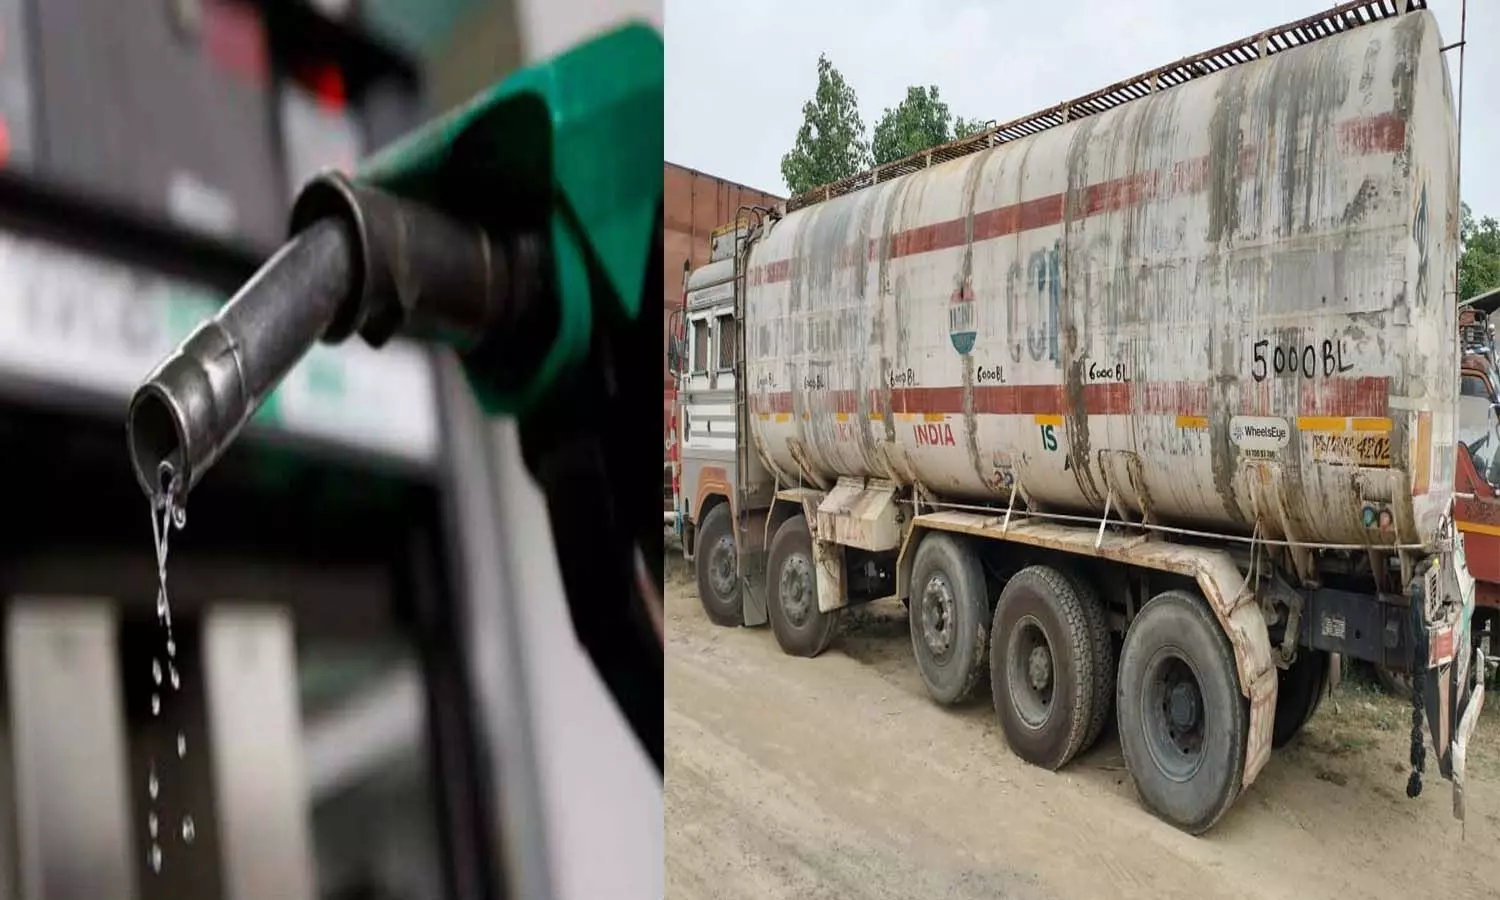 Petrol-diesel theft racket exposed by STF in Lucknow